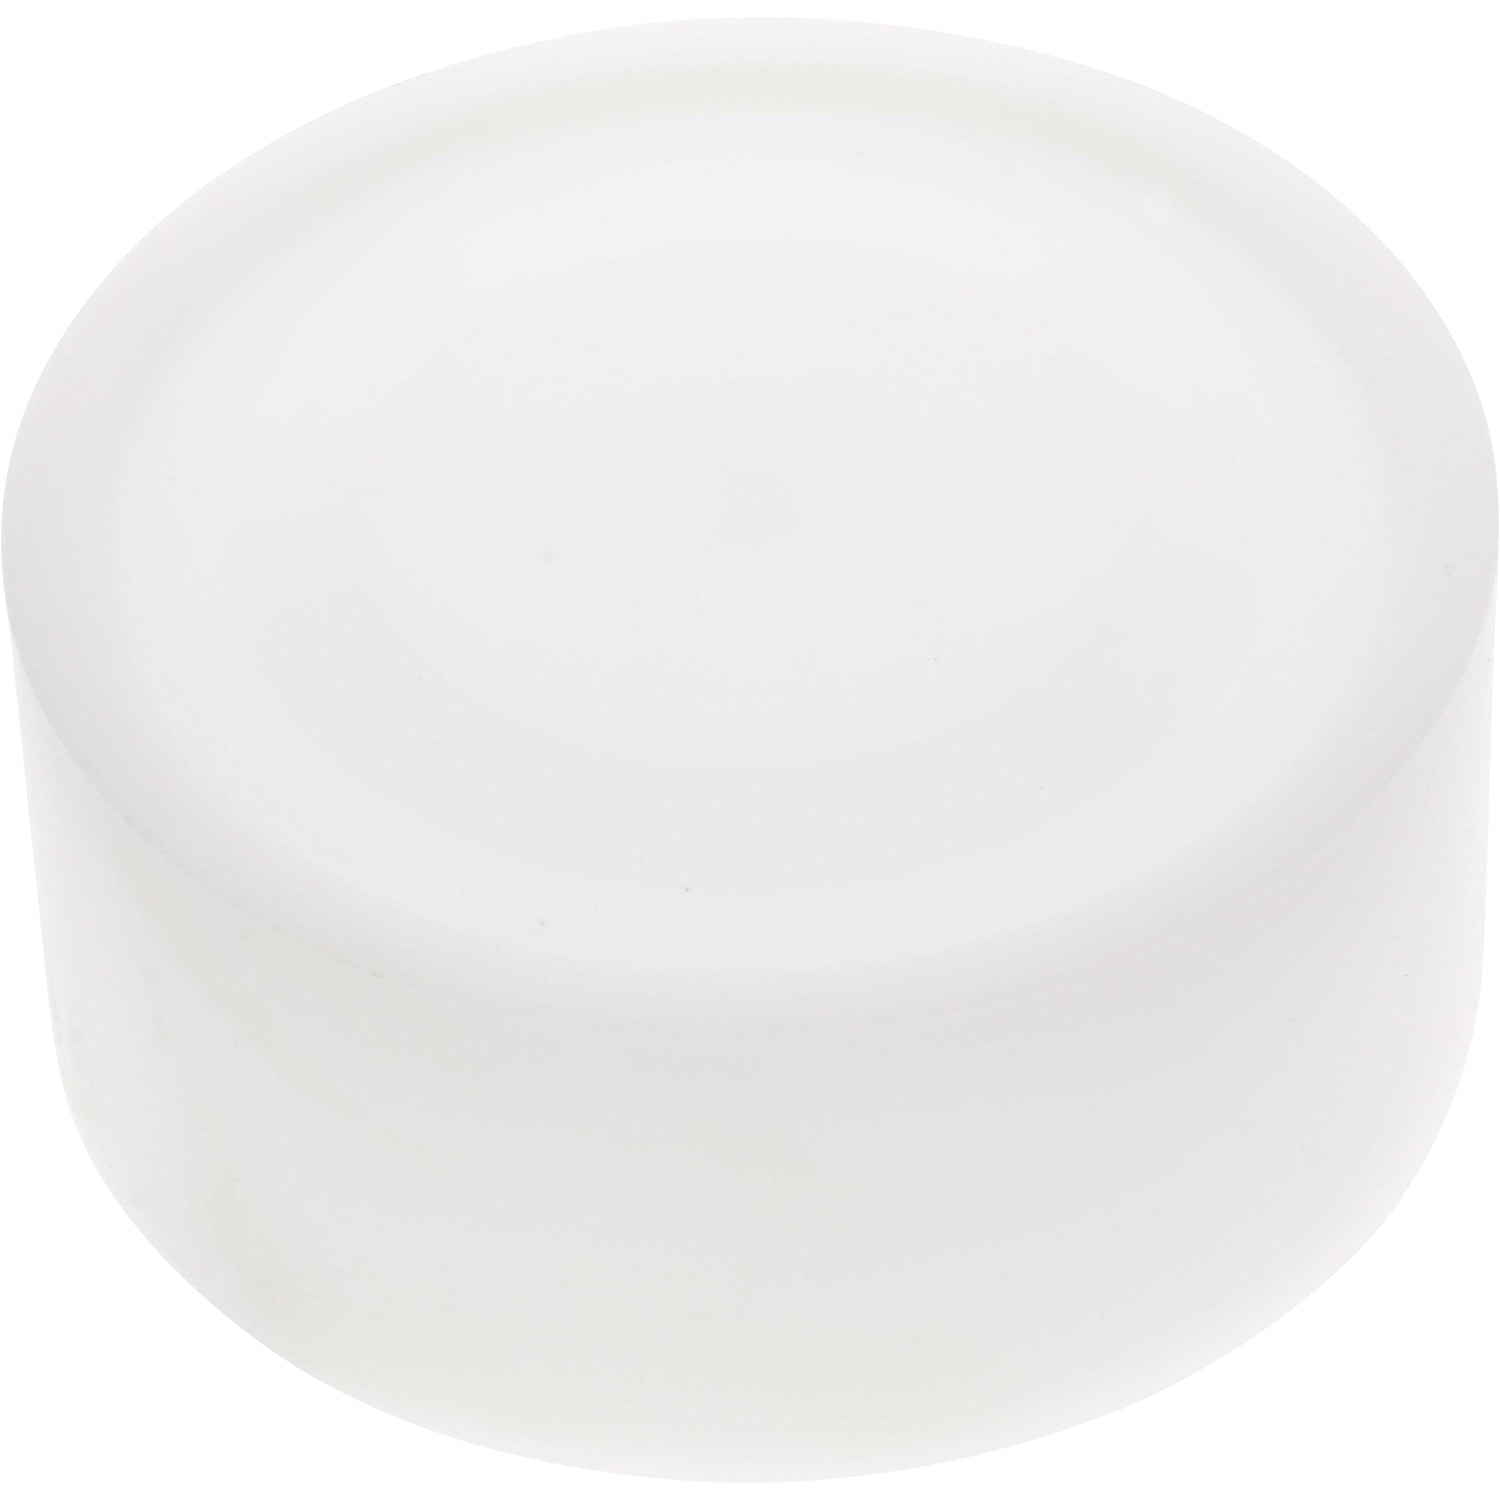 White cylindrical machined part made of Delrin plastic, shaped like a puck on white background